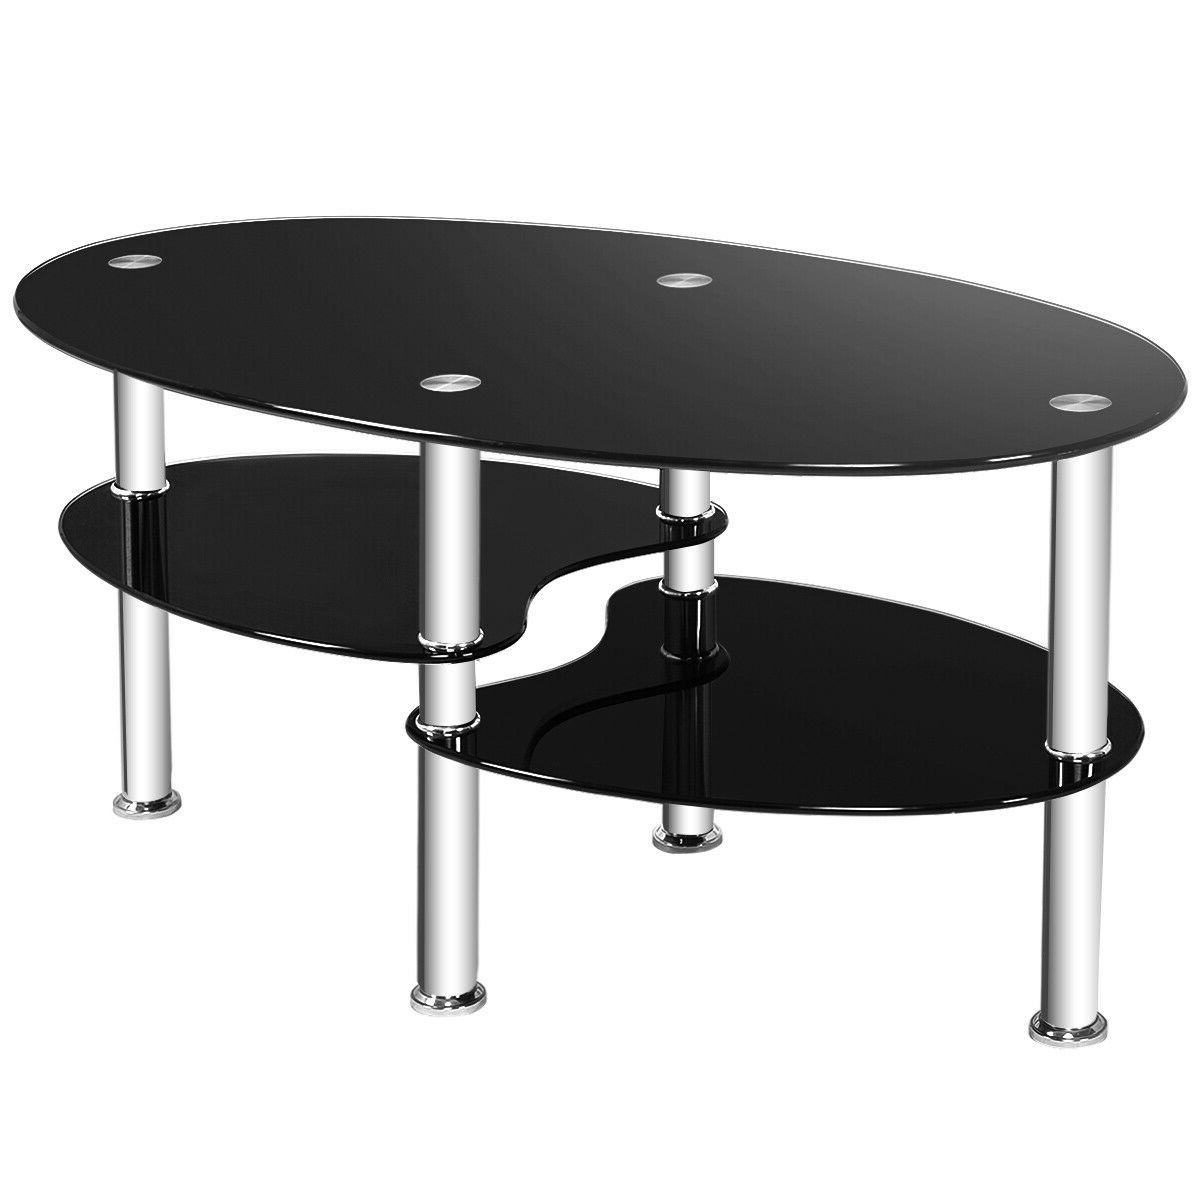 2019 Glossy White Hollow Core Tempered Glass Cocktail Tables For Costway Tempered Glass Oval Side Coffee Table Shelf Chrome Base Living Room  Black (View 16 of 20)